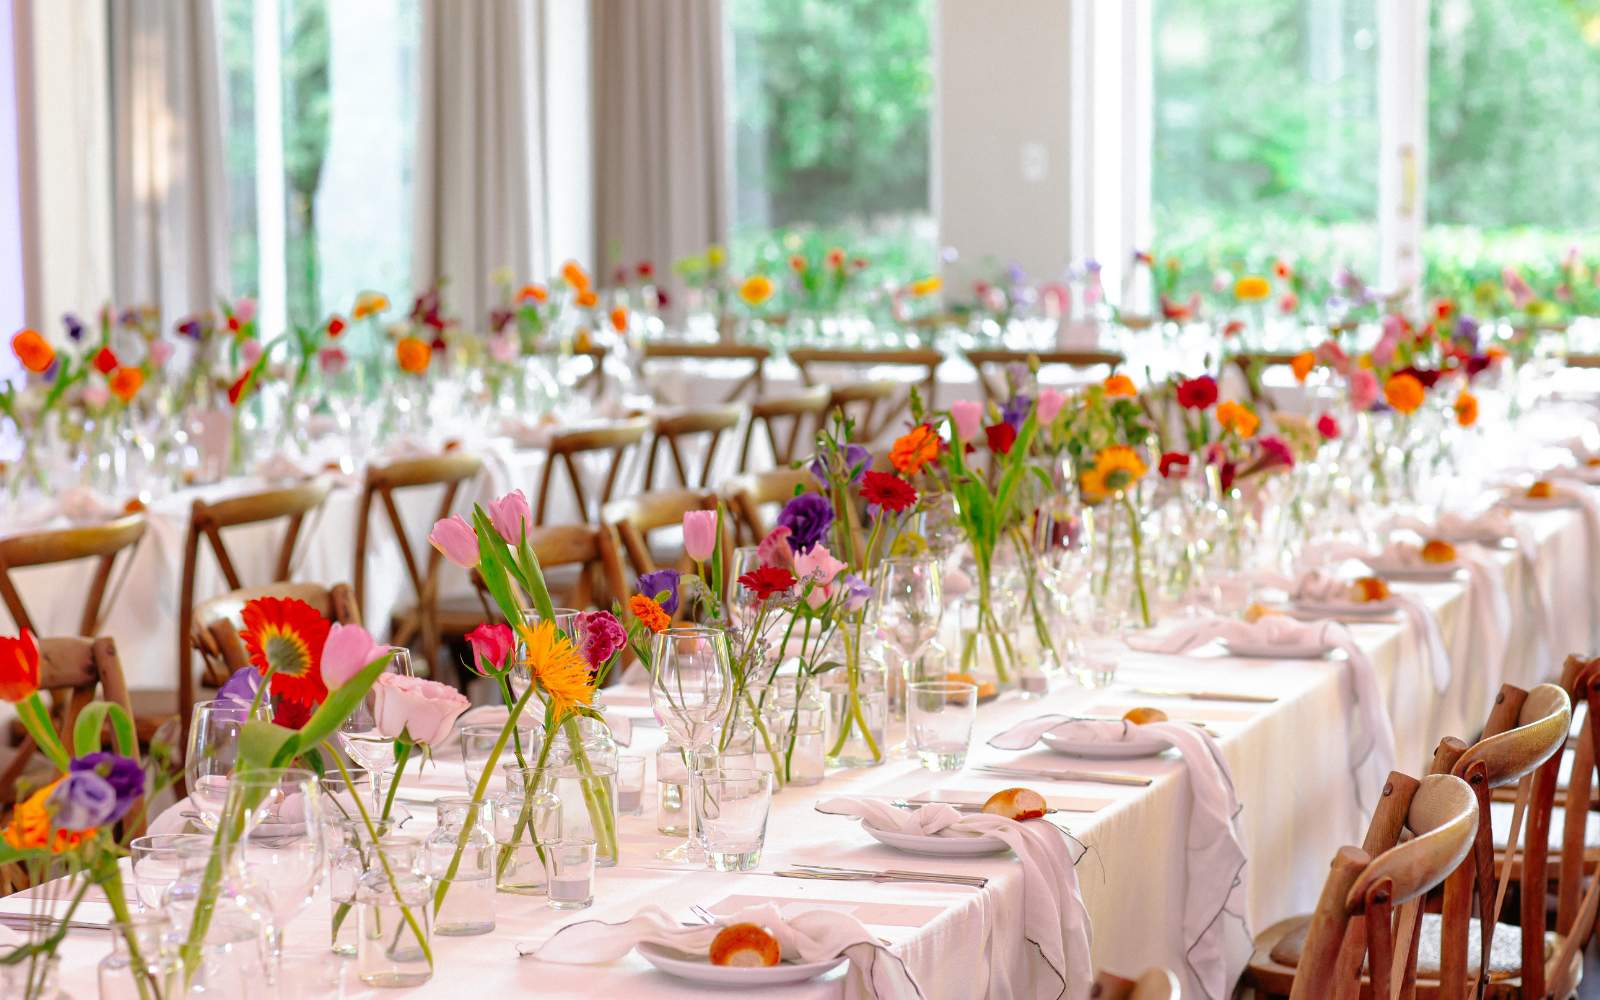 Wedding decor at Cape Town Wedding Venue, colourful flowers in vases - Fabulous Flowers